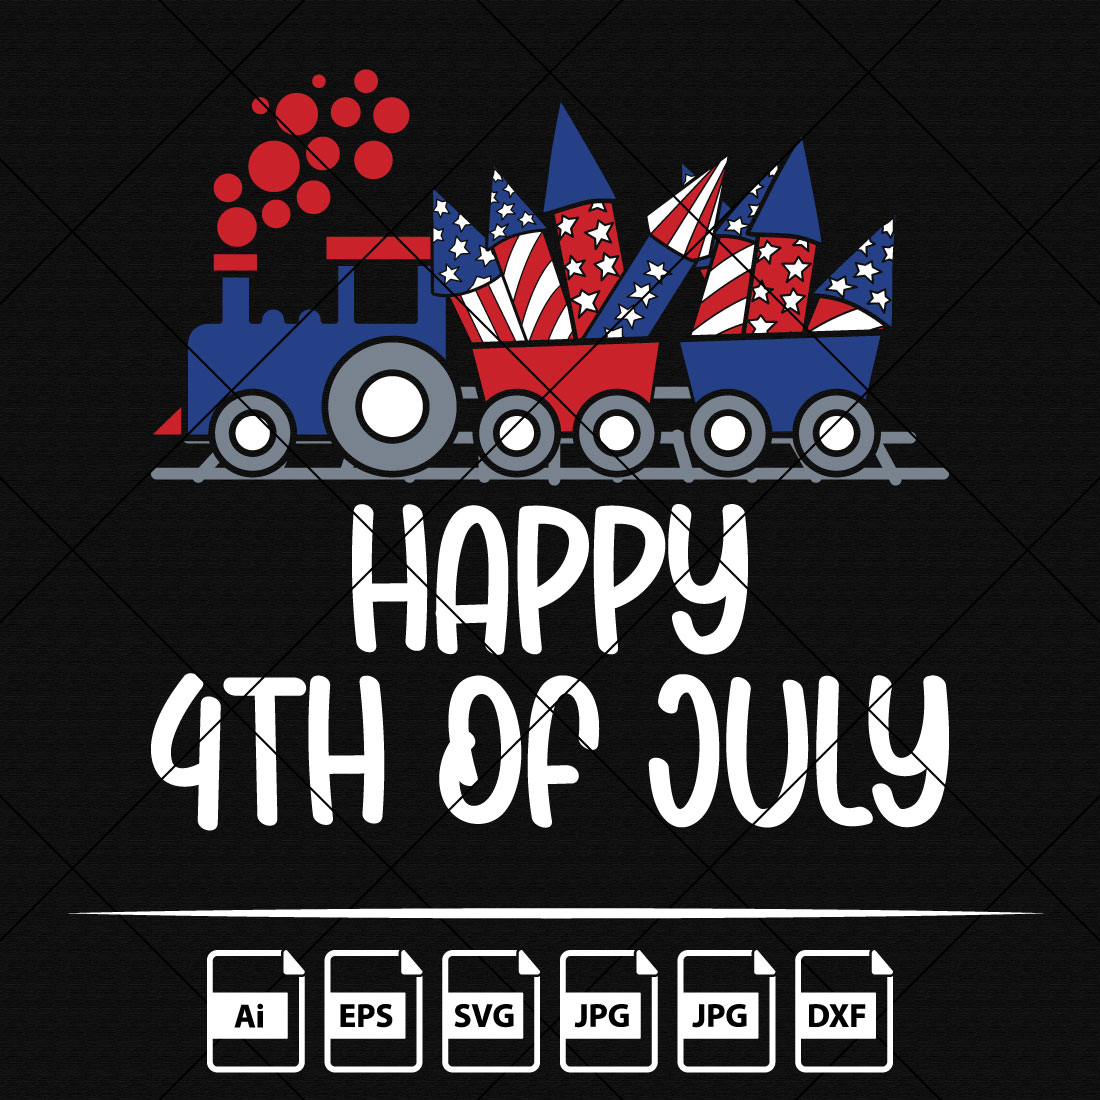 Happy 4th of July American independence day US flag train firecracker US freedom day America Birthday shirt print template cover image.